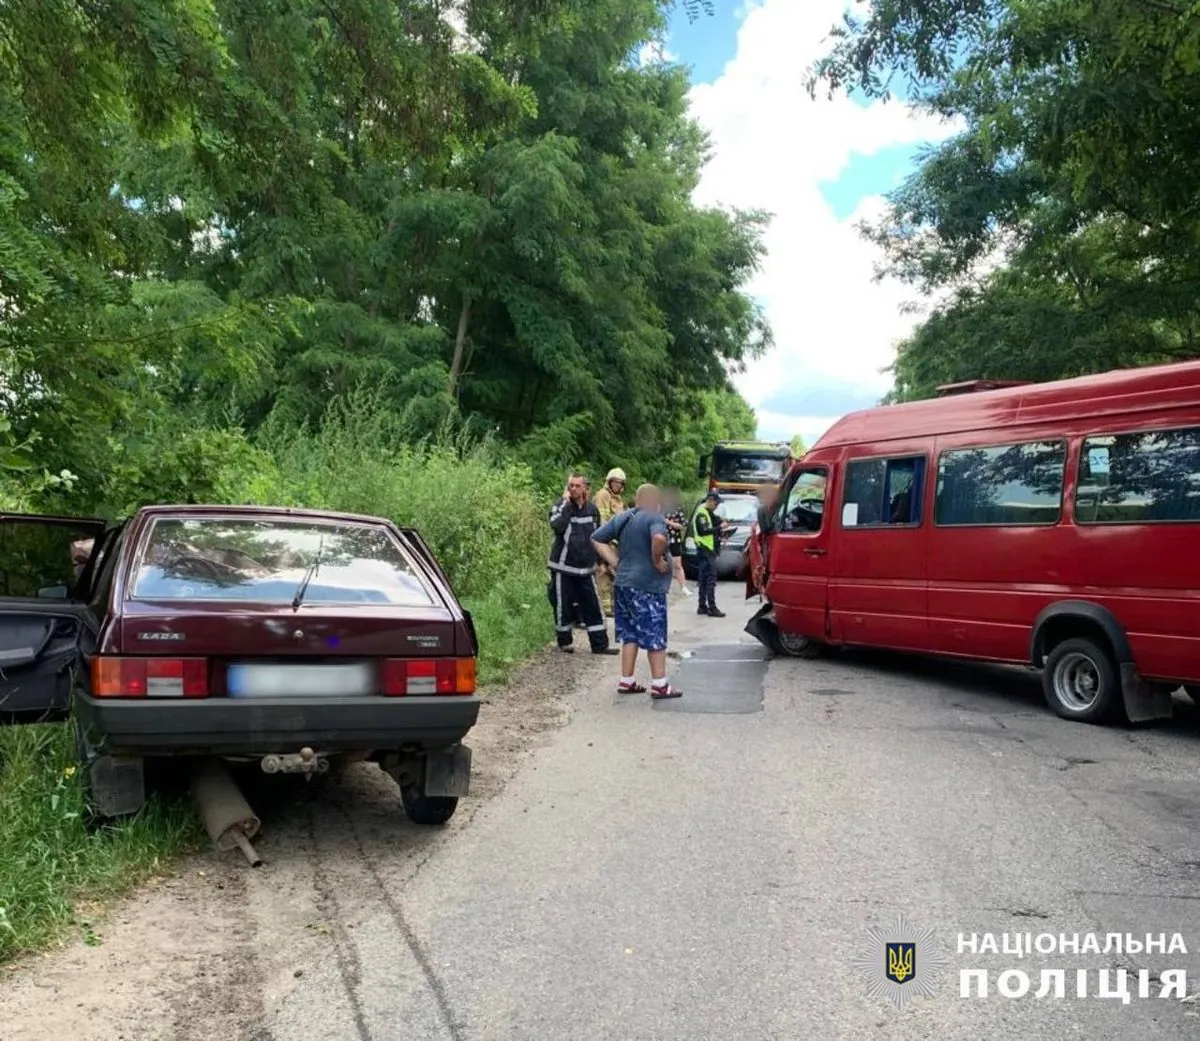 Near Kiev, a minibus with passengers collided with a passenger car: two people were hospitalized